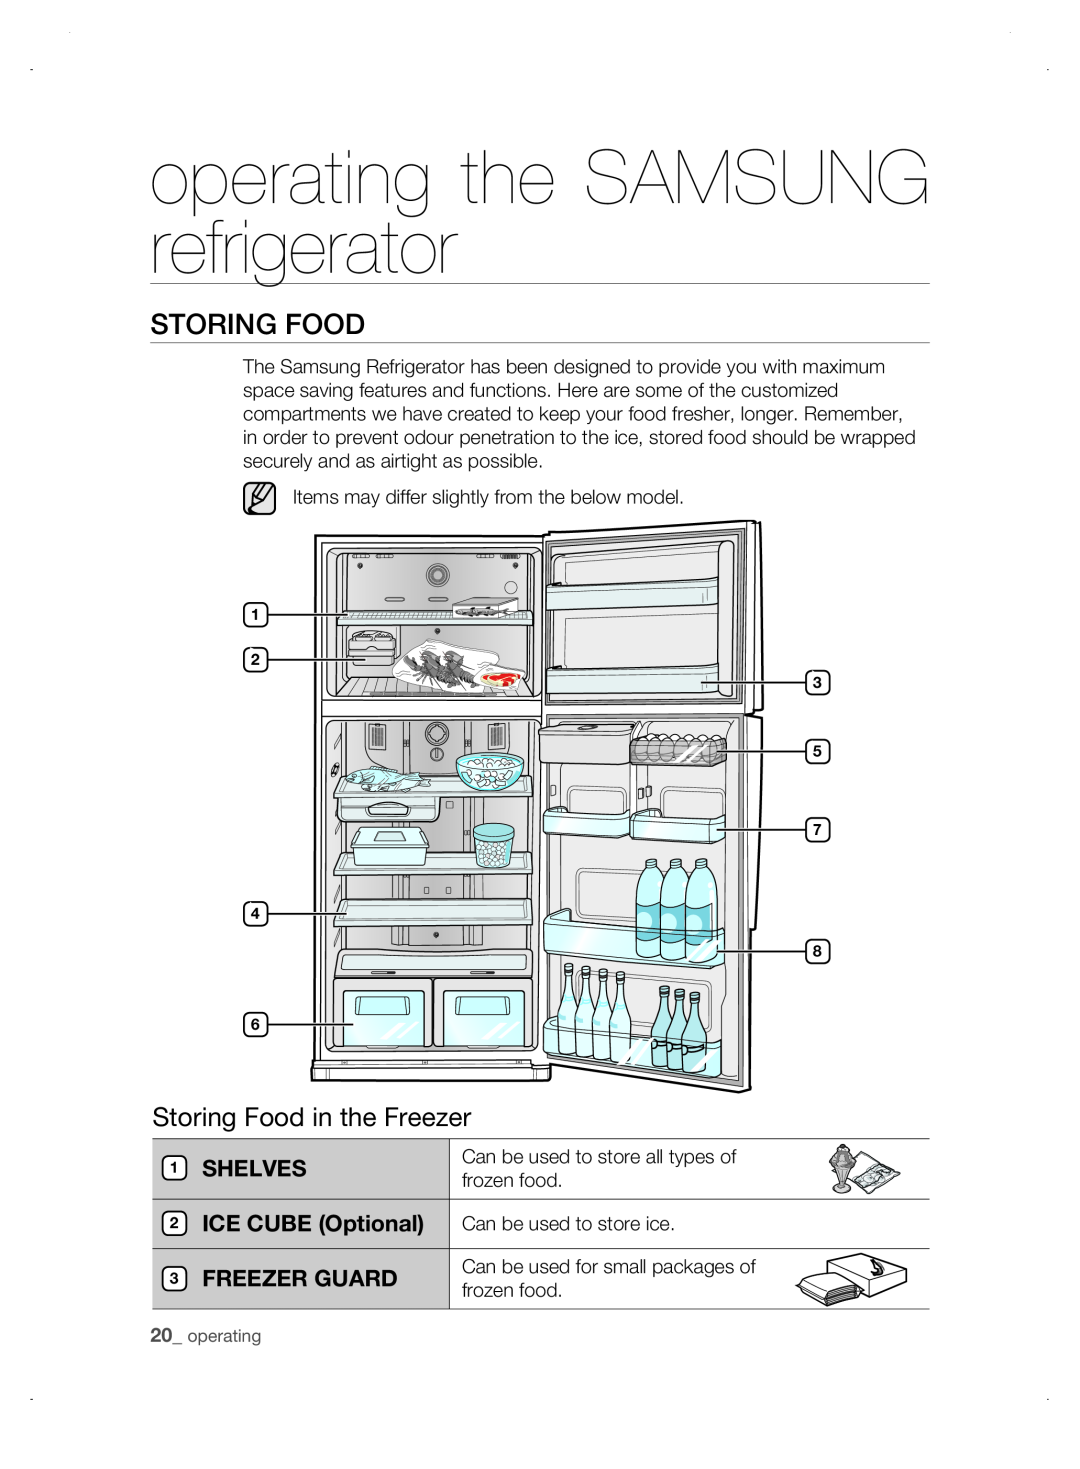 Samsung DA99-01906A user manual storing fooD, Shelves, Freezer Guard, Can be used to store all types of, frozen food 